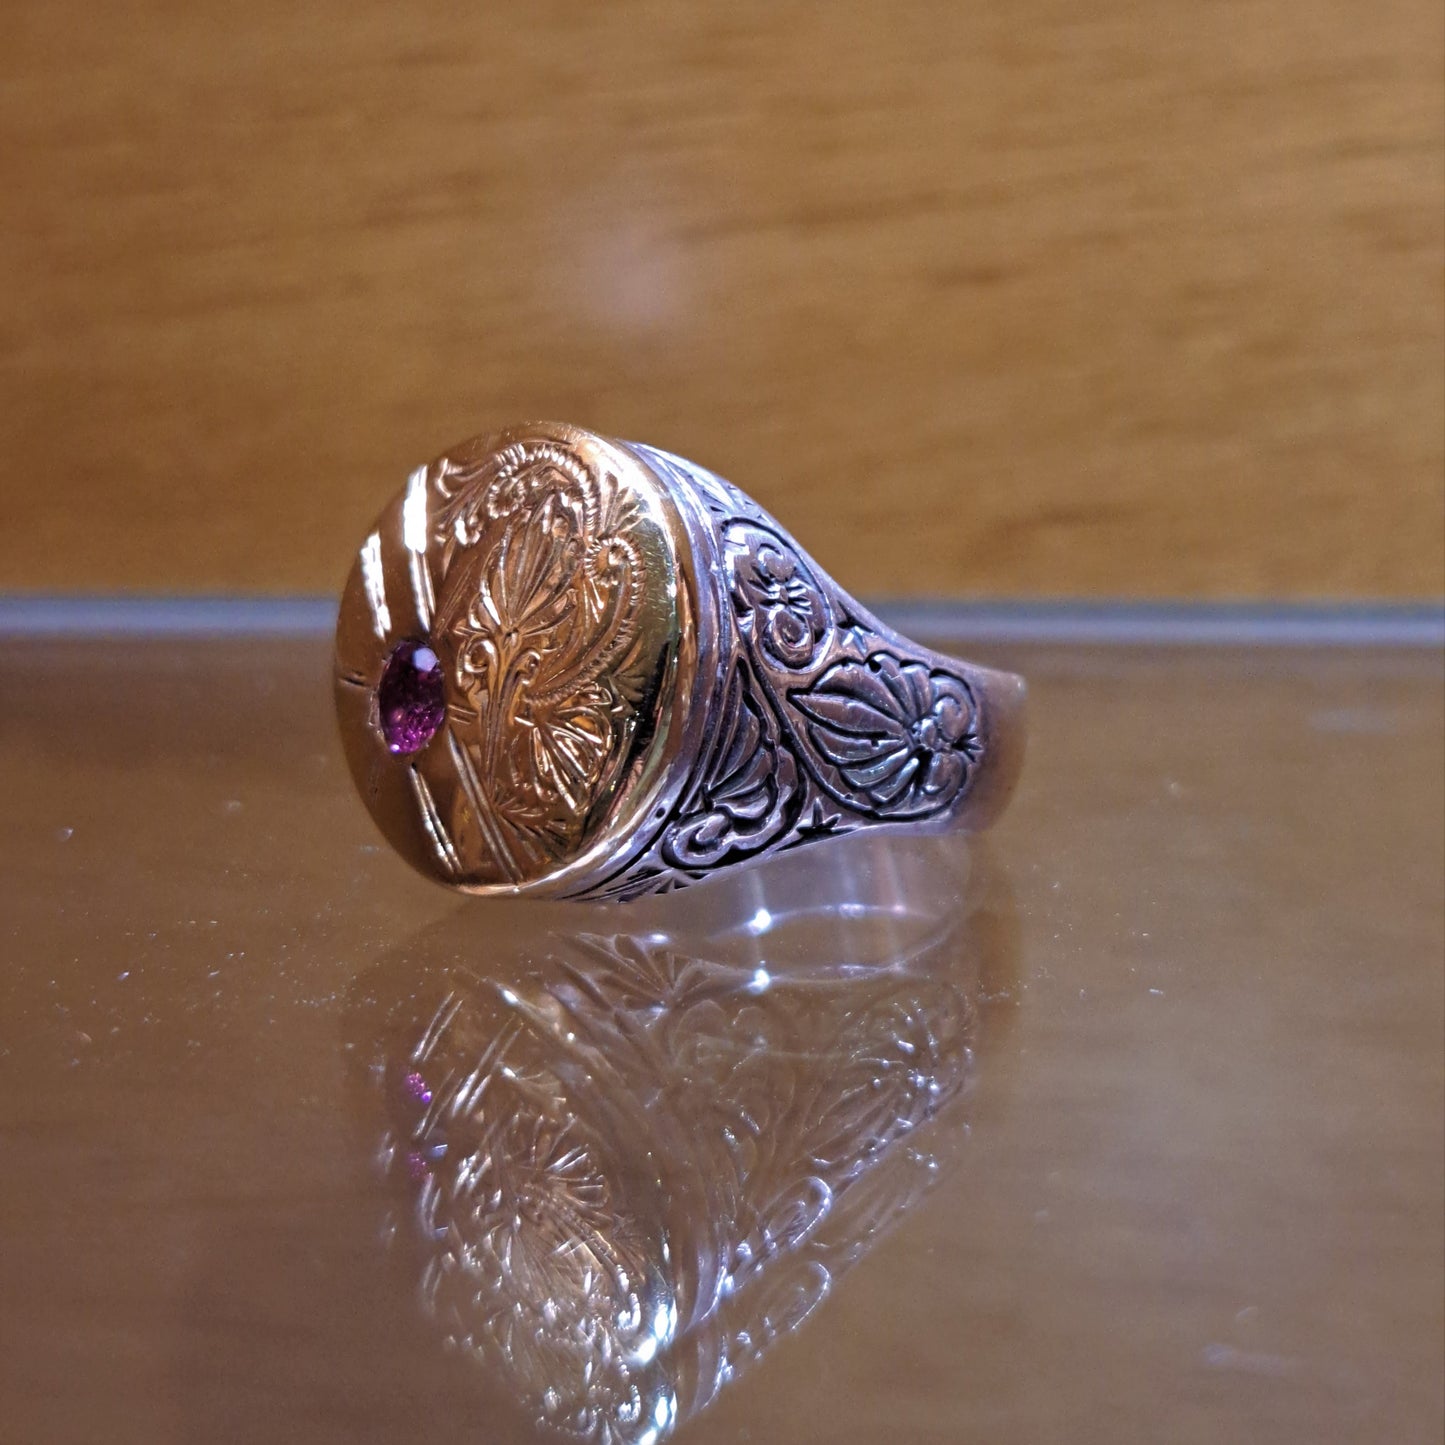 Handmade 18K and silver byzantine style ring